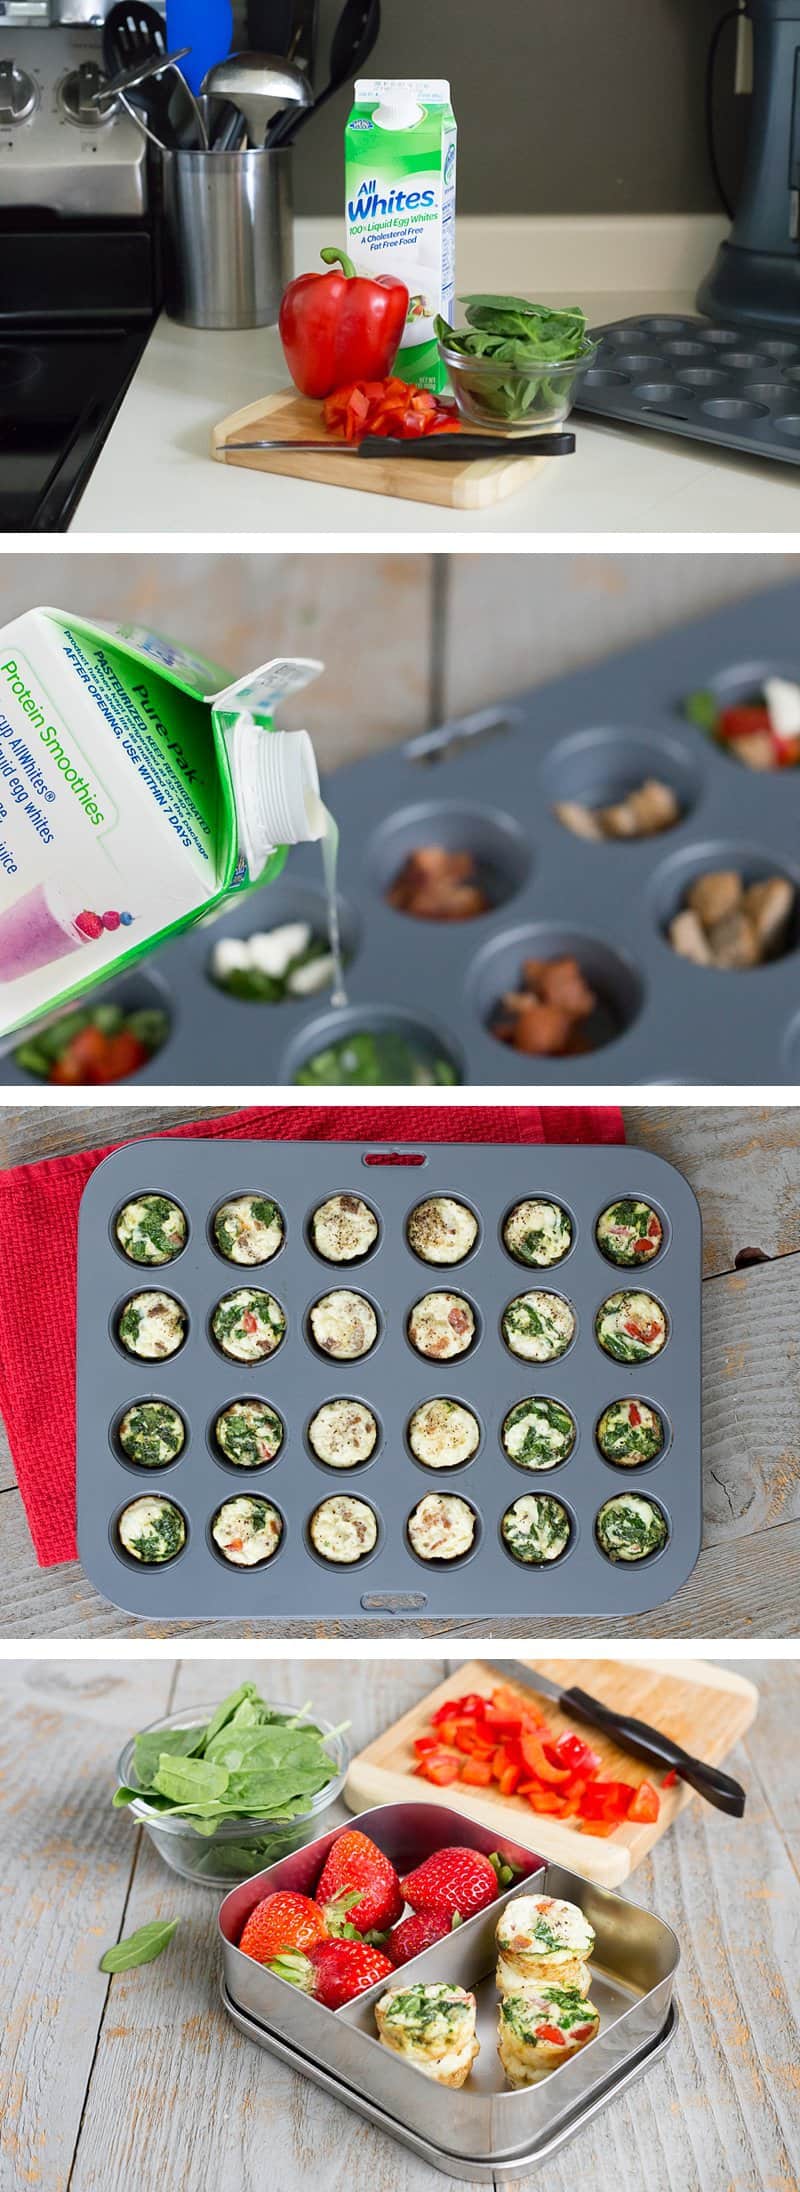 This healthy Red Pepper & Spinach Egg White Muffins recipe is packed full of protein, gluten-free, paleo-friendly and a quick on-the-go breakfast snack. You can make one batch to last a full week. *Insanely easy way to start your day with eggs